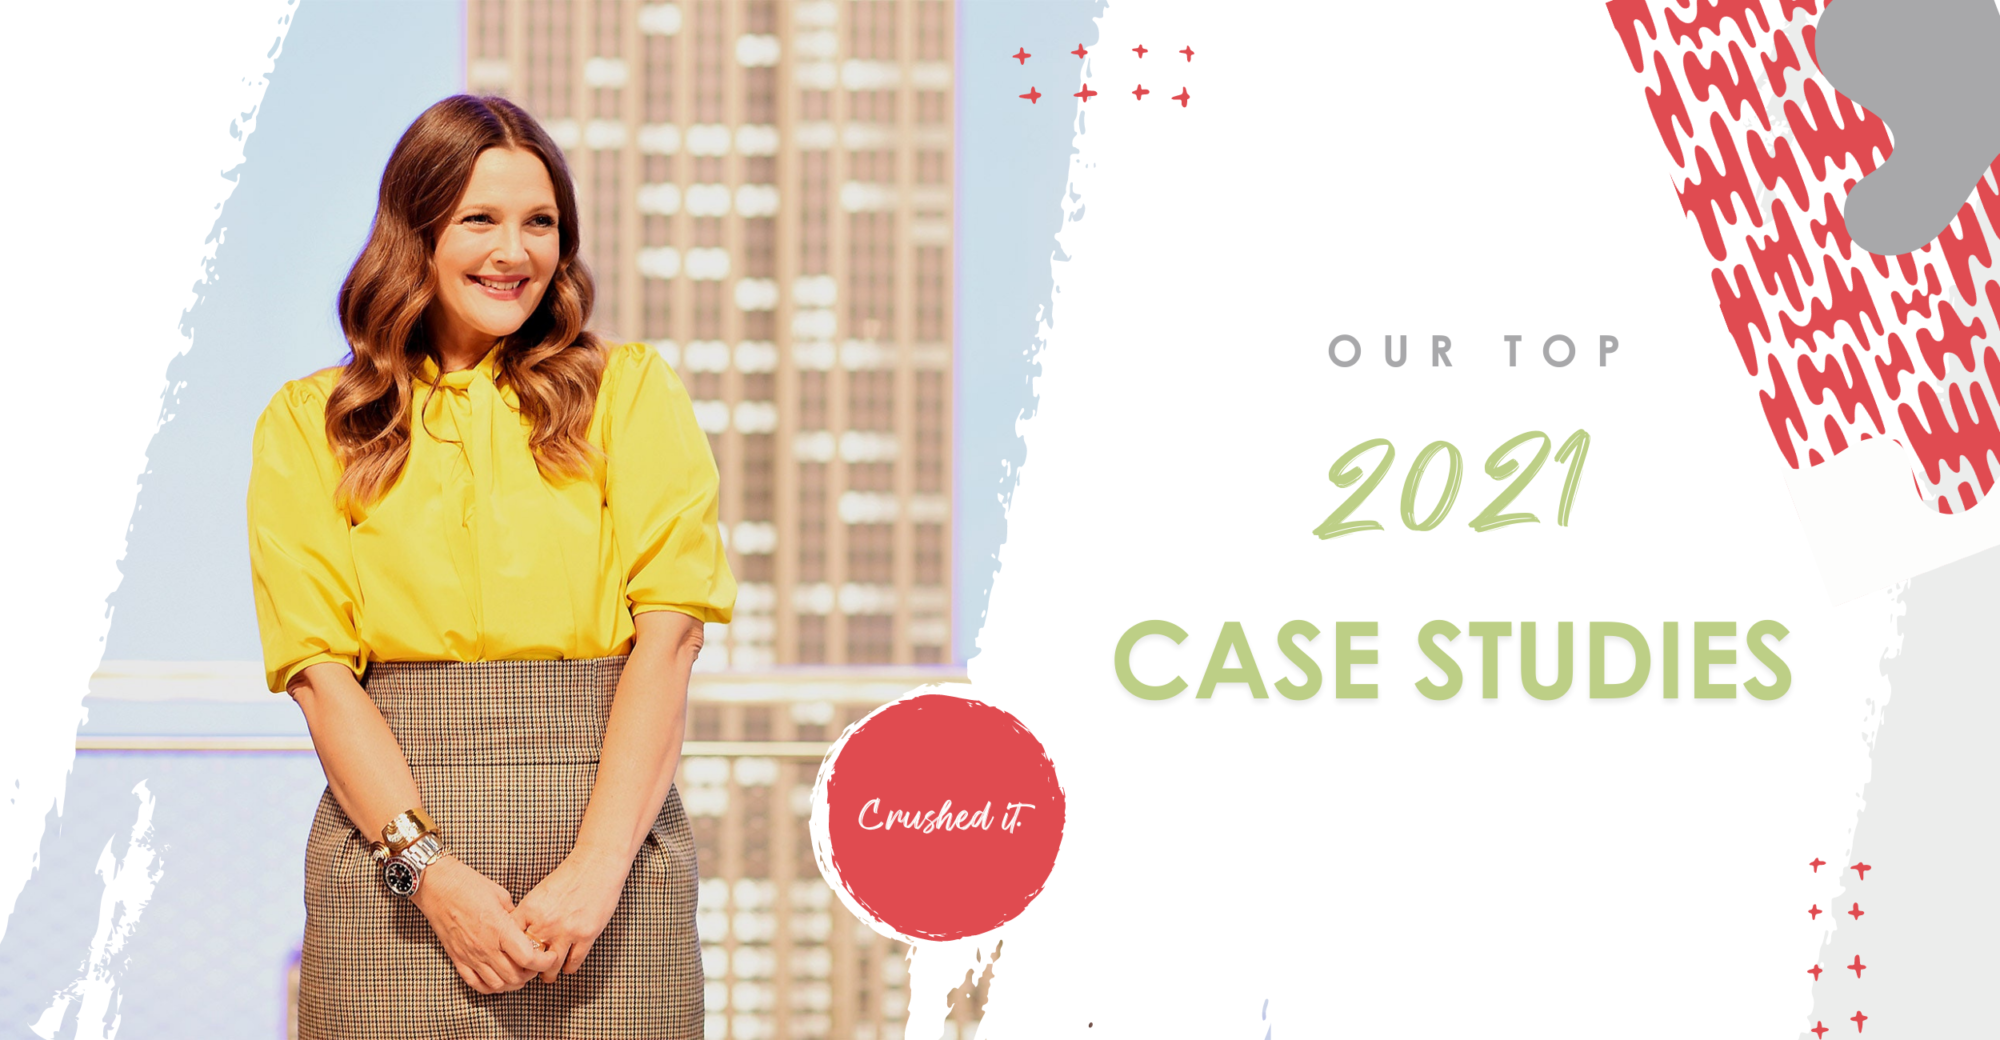 Drew Barrymore smiling with text by her that reads, "Our top 2021 case studies. Crushed it."